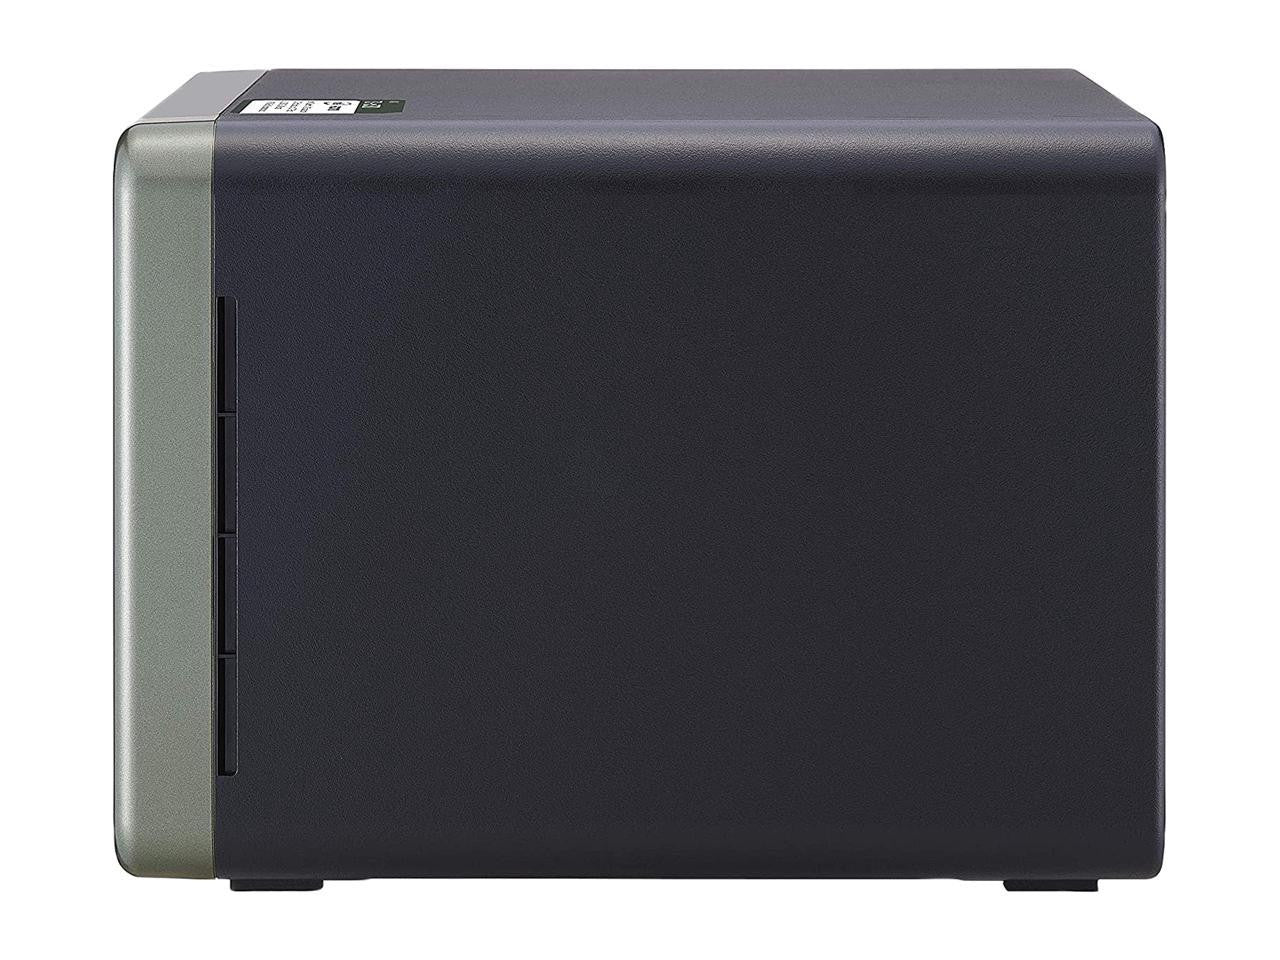 QNAP TS-253D Quad Core 2.7Ghz 2-Bay NAS with 4GB RAM and 8TB (2 x 4TB) of Seagate Ironwolf NAS Drives Fully Assembled and Tested By CustomTechSales